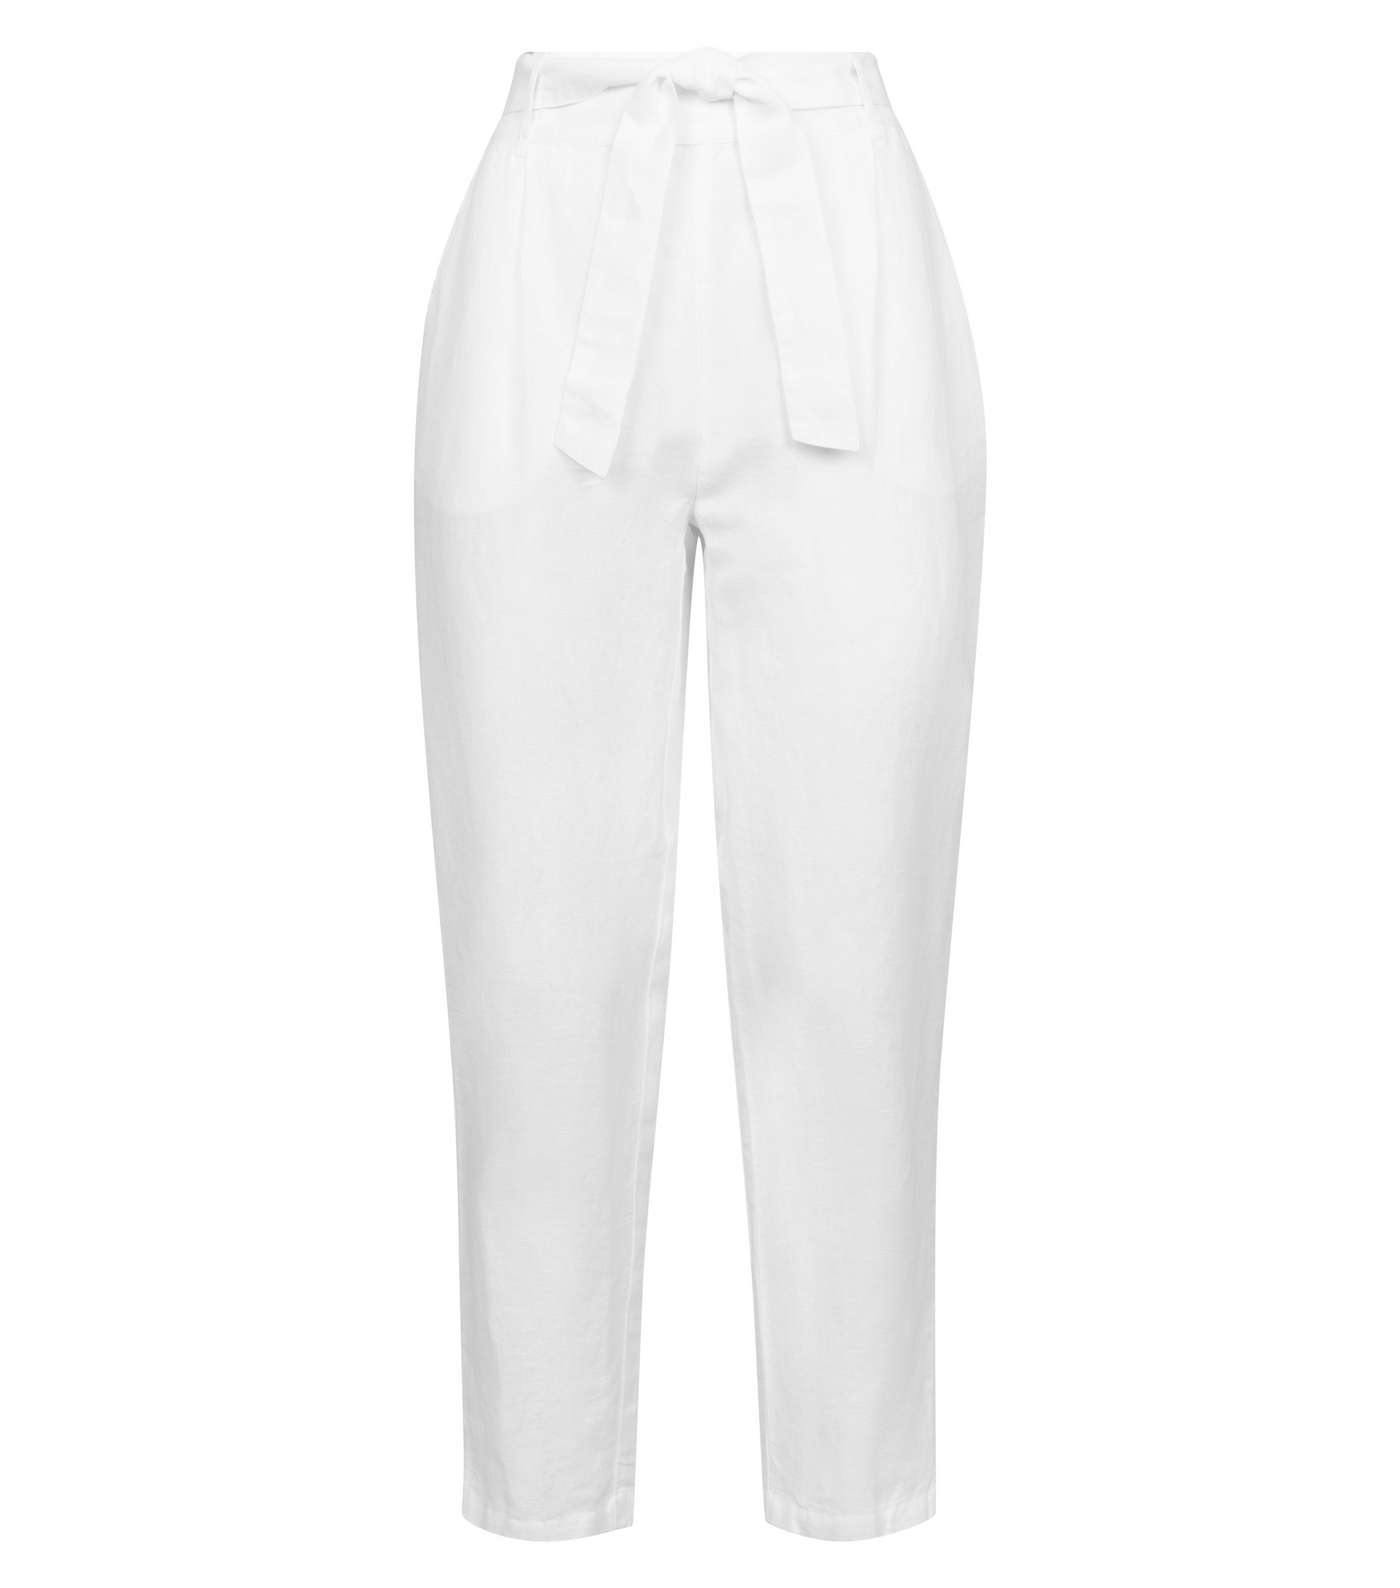 White Linen Blend Tie Waist Cropped Trousers Image 4